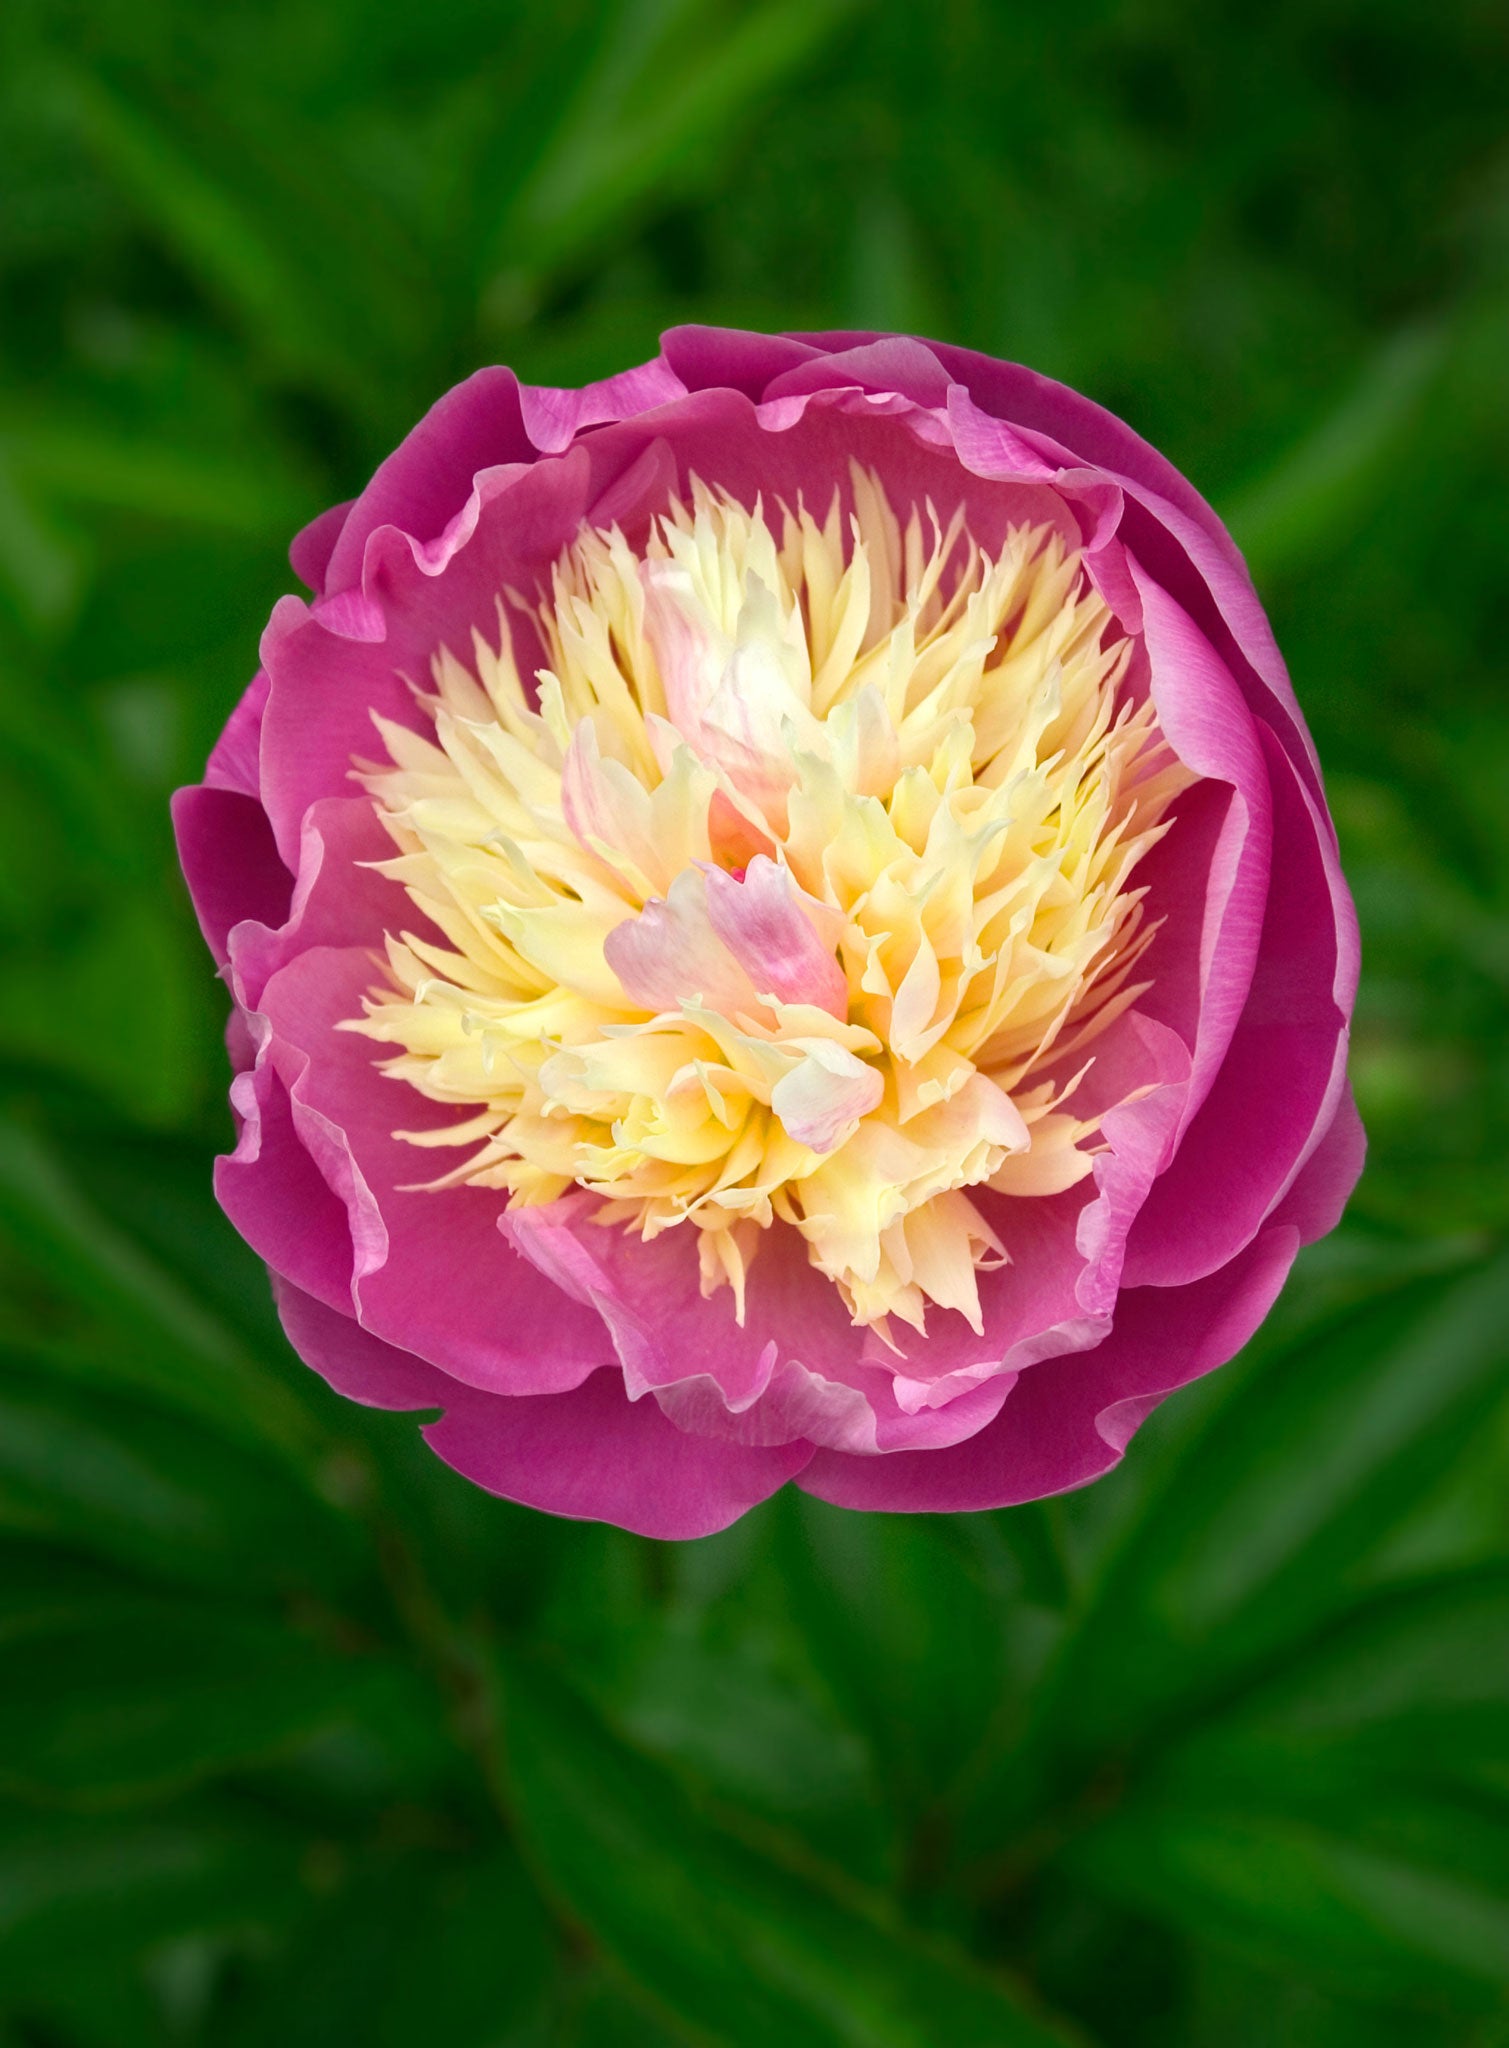 A 'peachy and perfectly arranged' peony 'Bowl of Beauty'